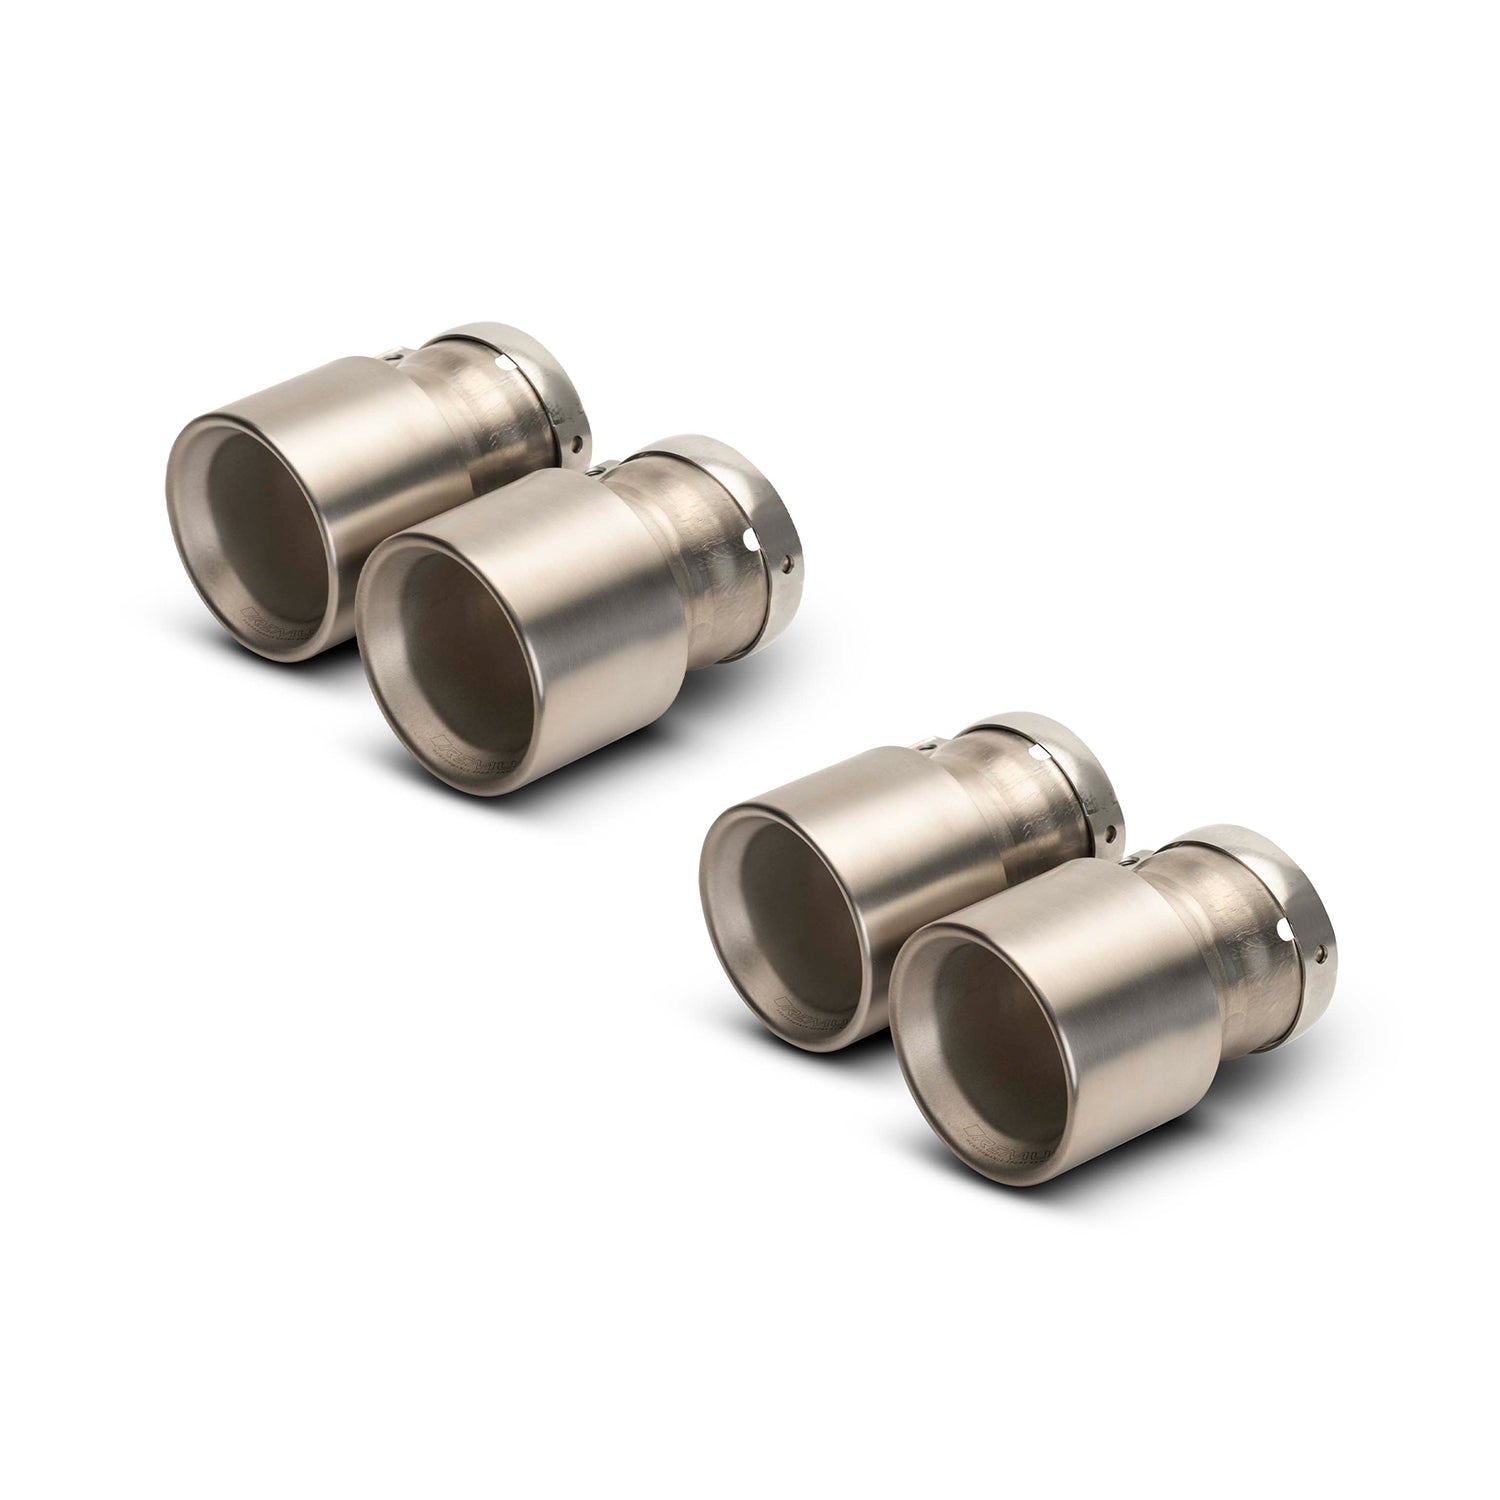 Remus Exhausts Brushed Titanium Tailpipes (Set Of 4)